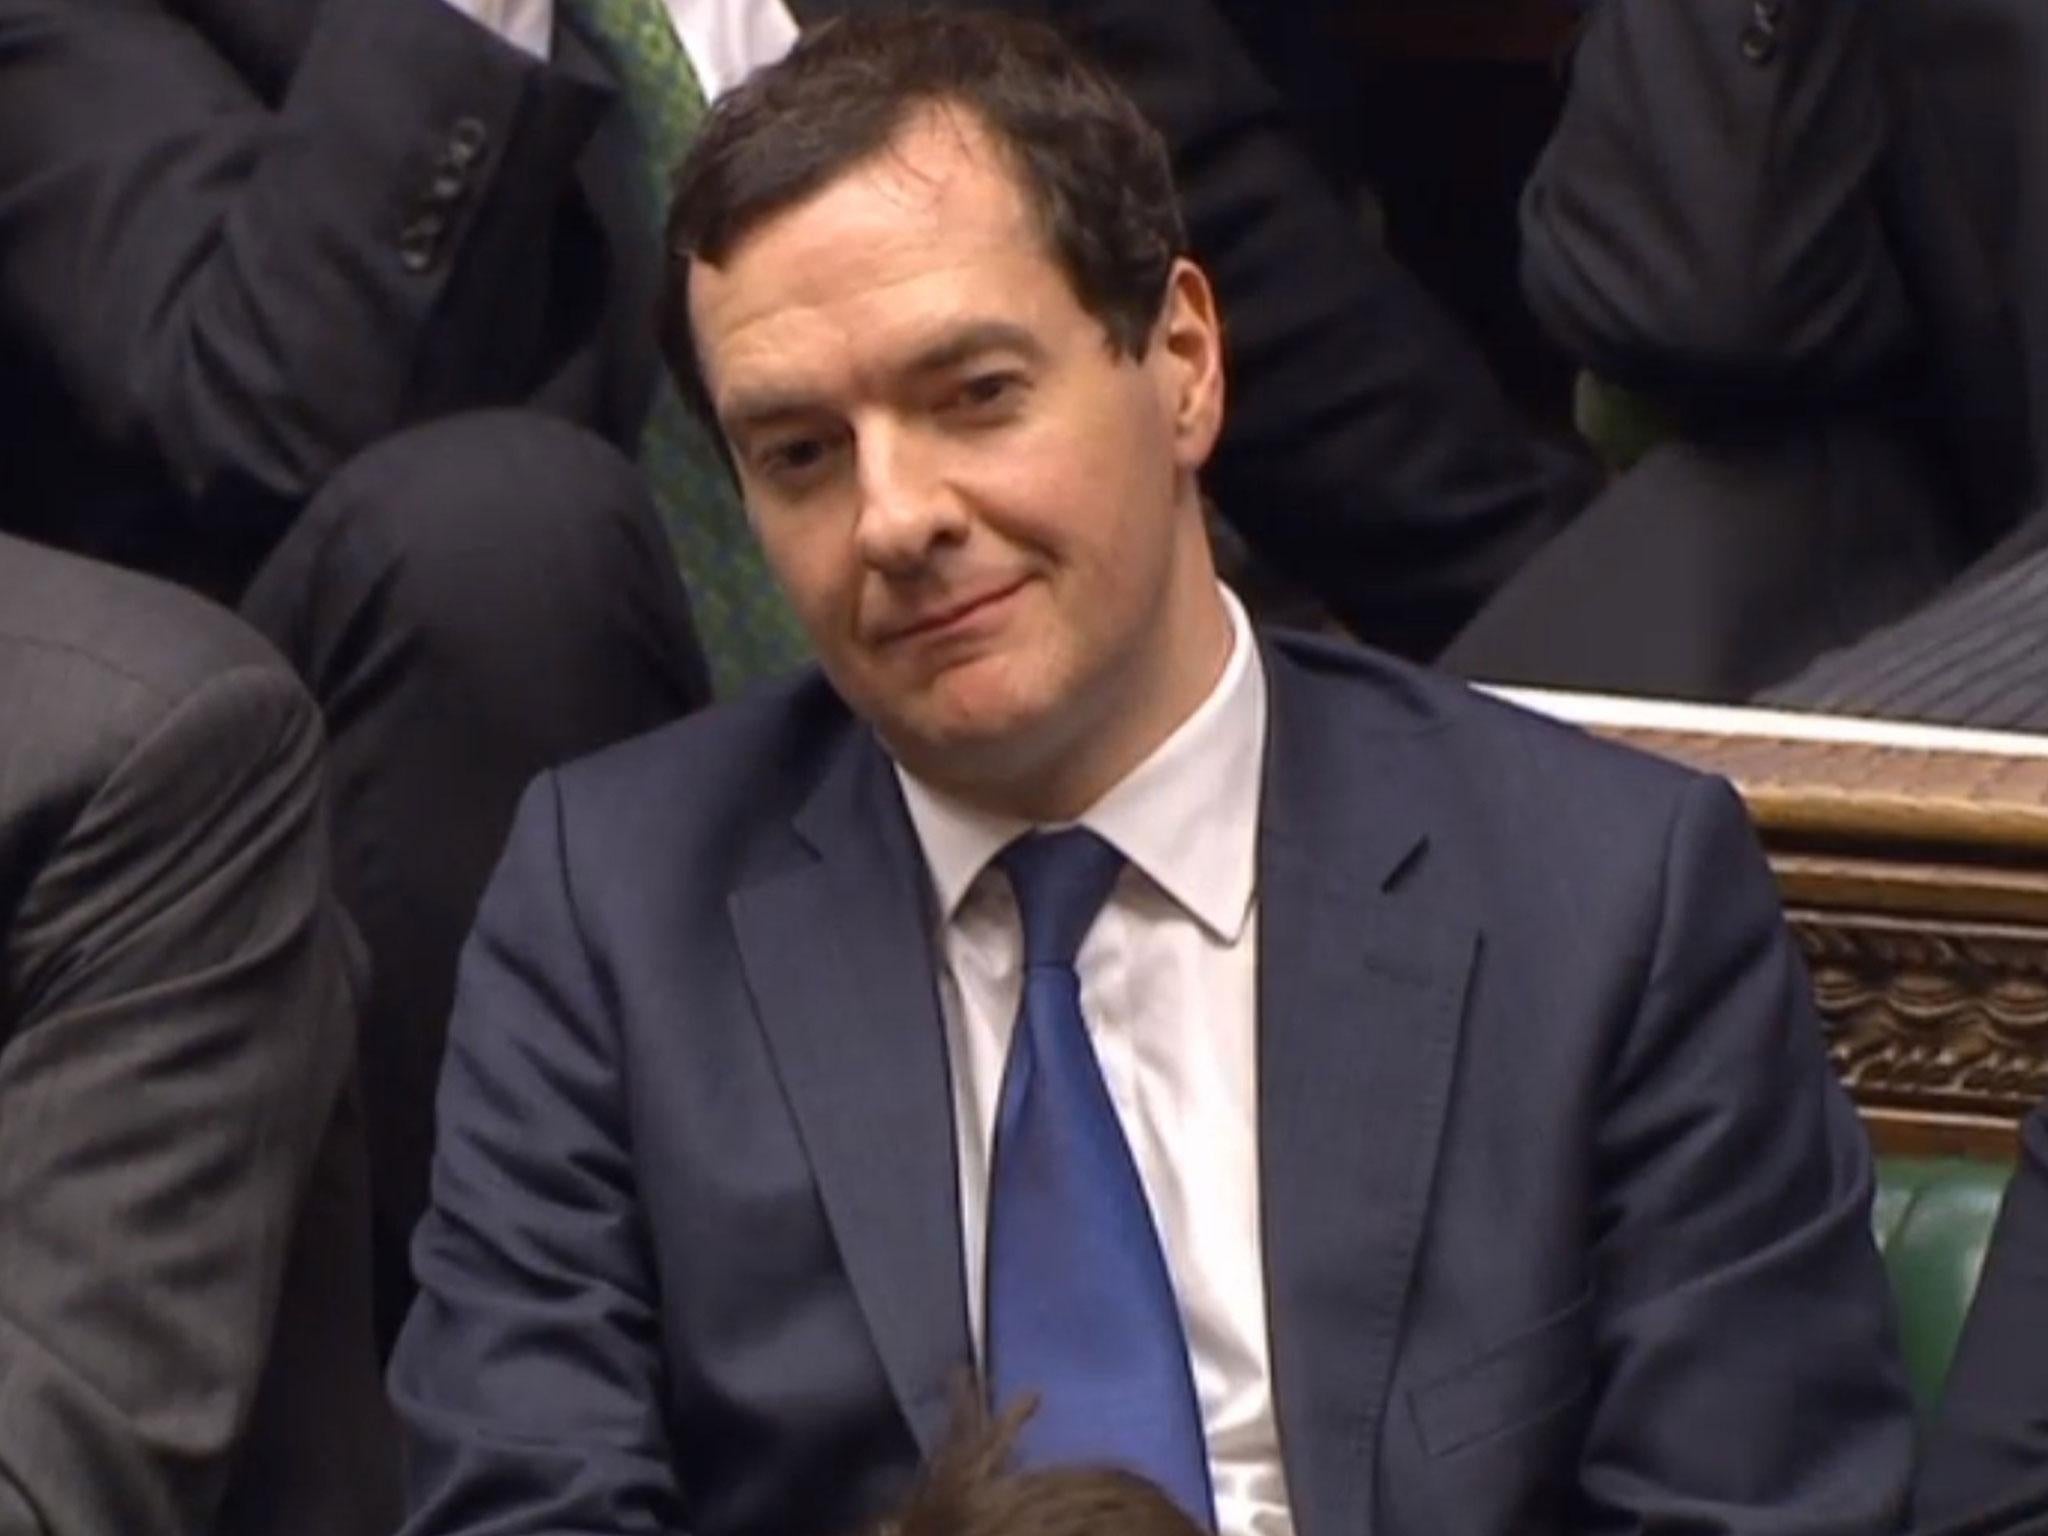 High earners like George Osborne were left relatively unaffected by this year's Budget